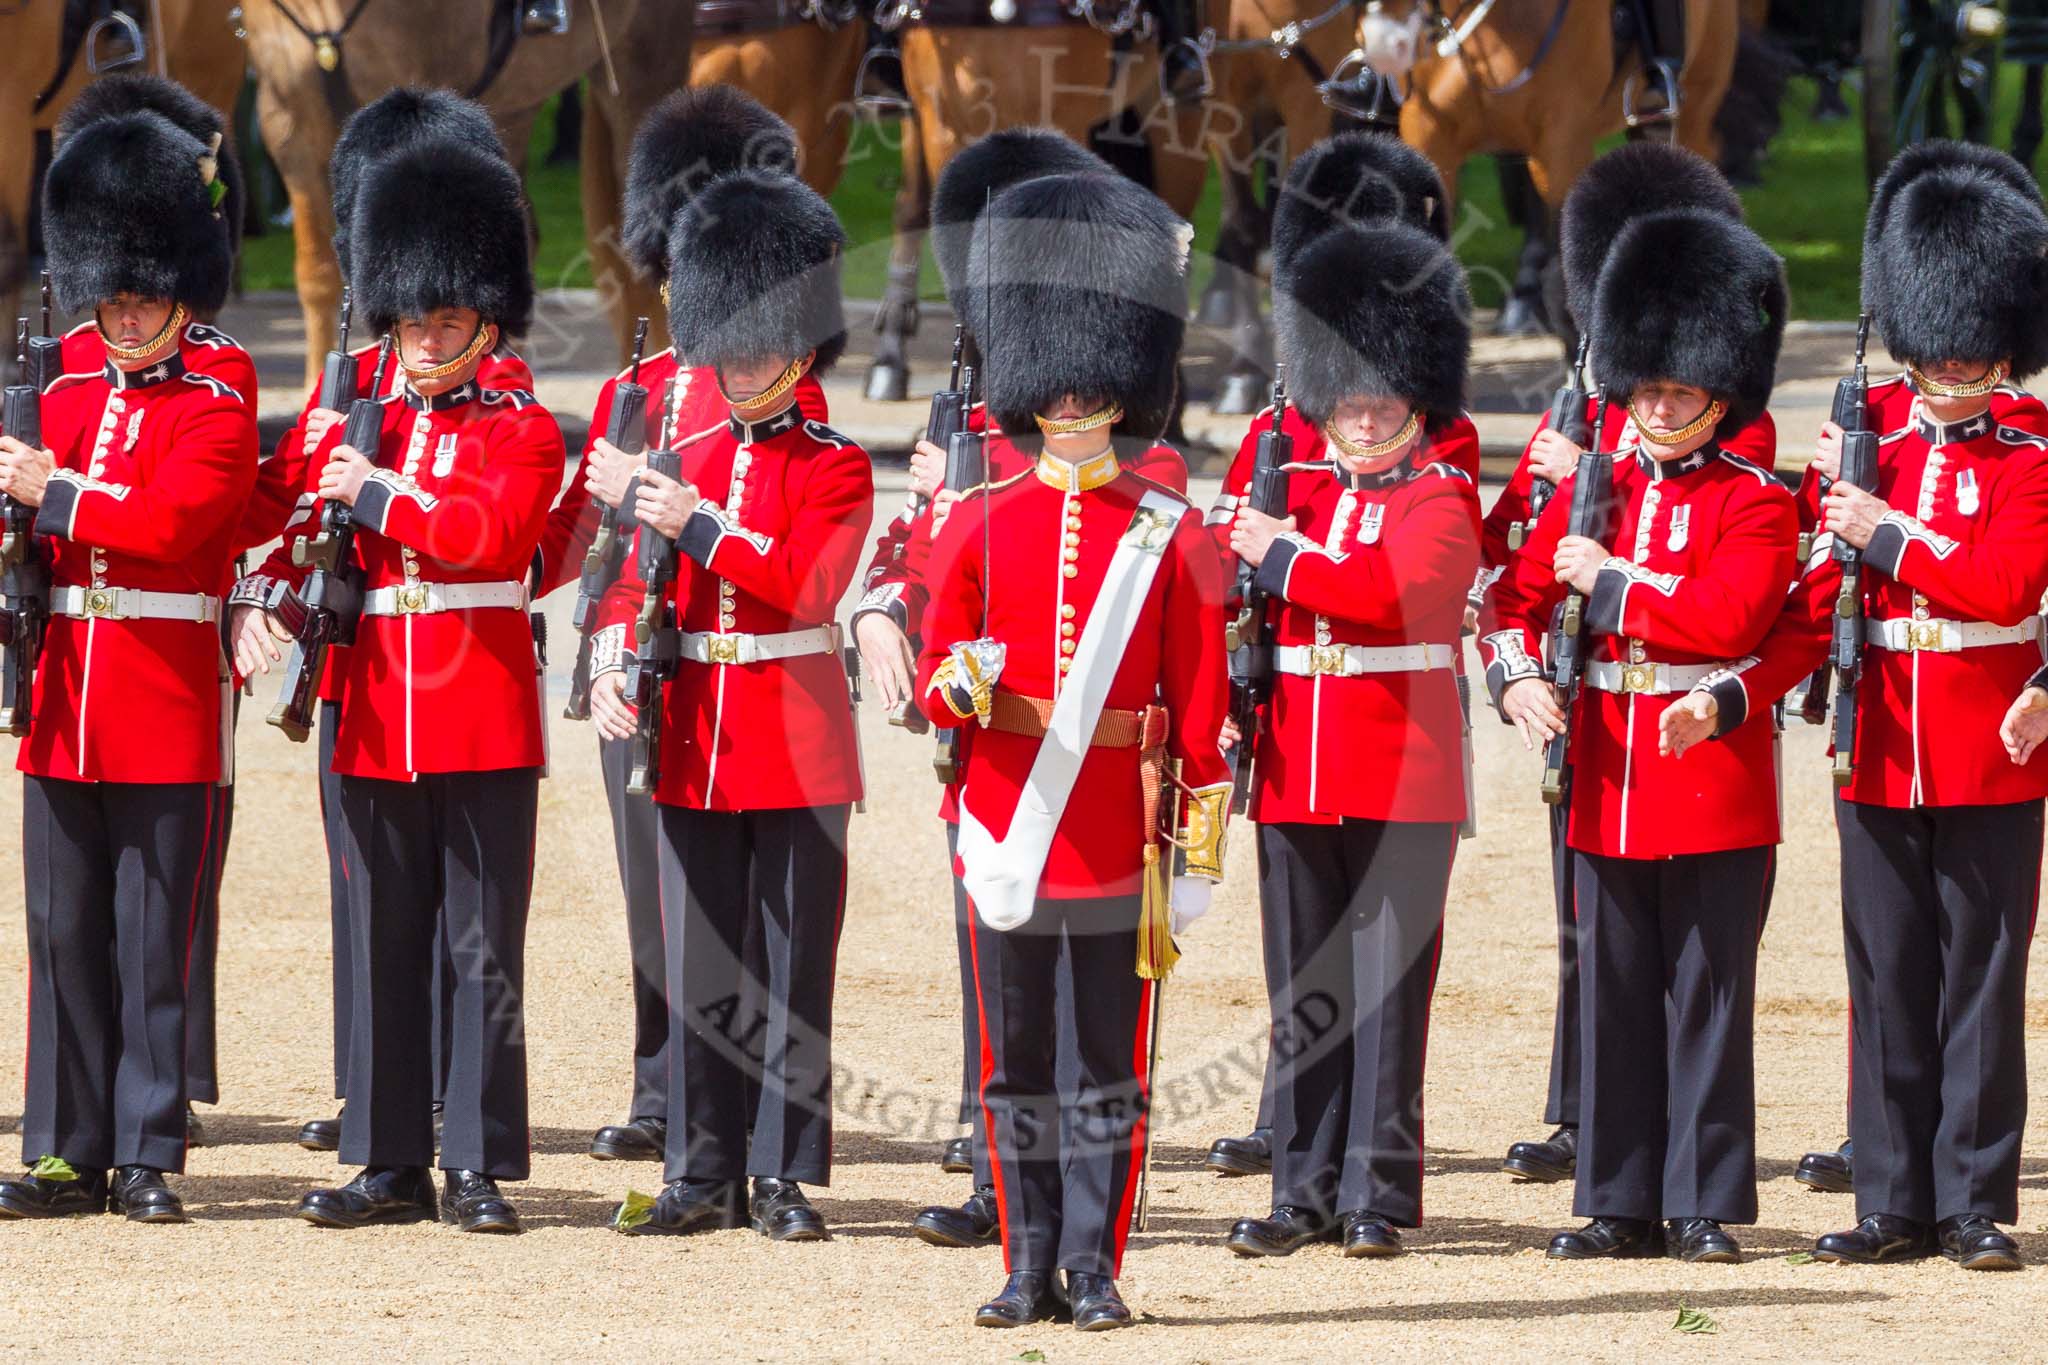 The Colonel's Review 2015.
Horse Guards Parade, Westminster,
London,

United Kingdom,
on 06 June 2015 at 10:42, image #132